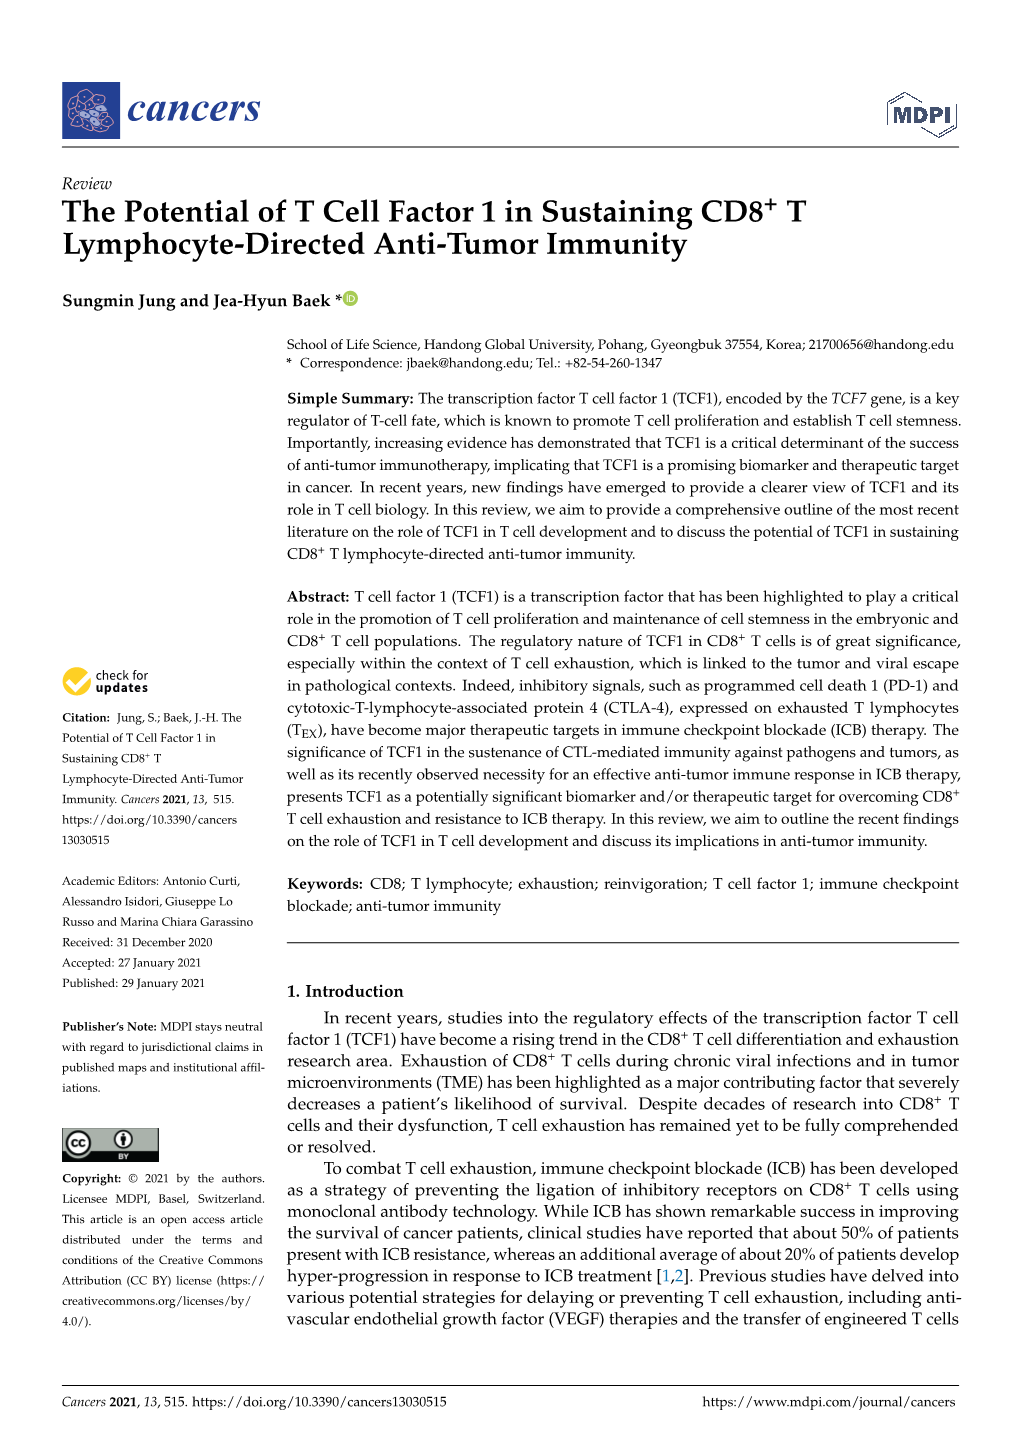 The Potential of T Cell Factor 1 in Sustaining CD8+ T Lymphocyte-Directed Anti-Tumor Immunity